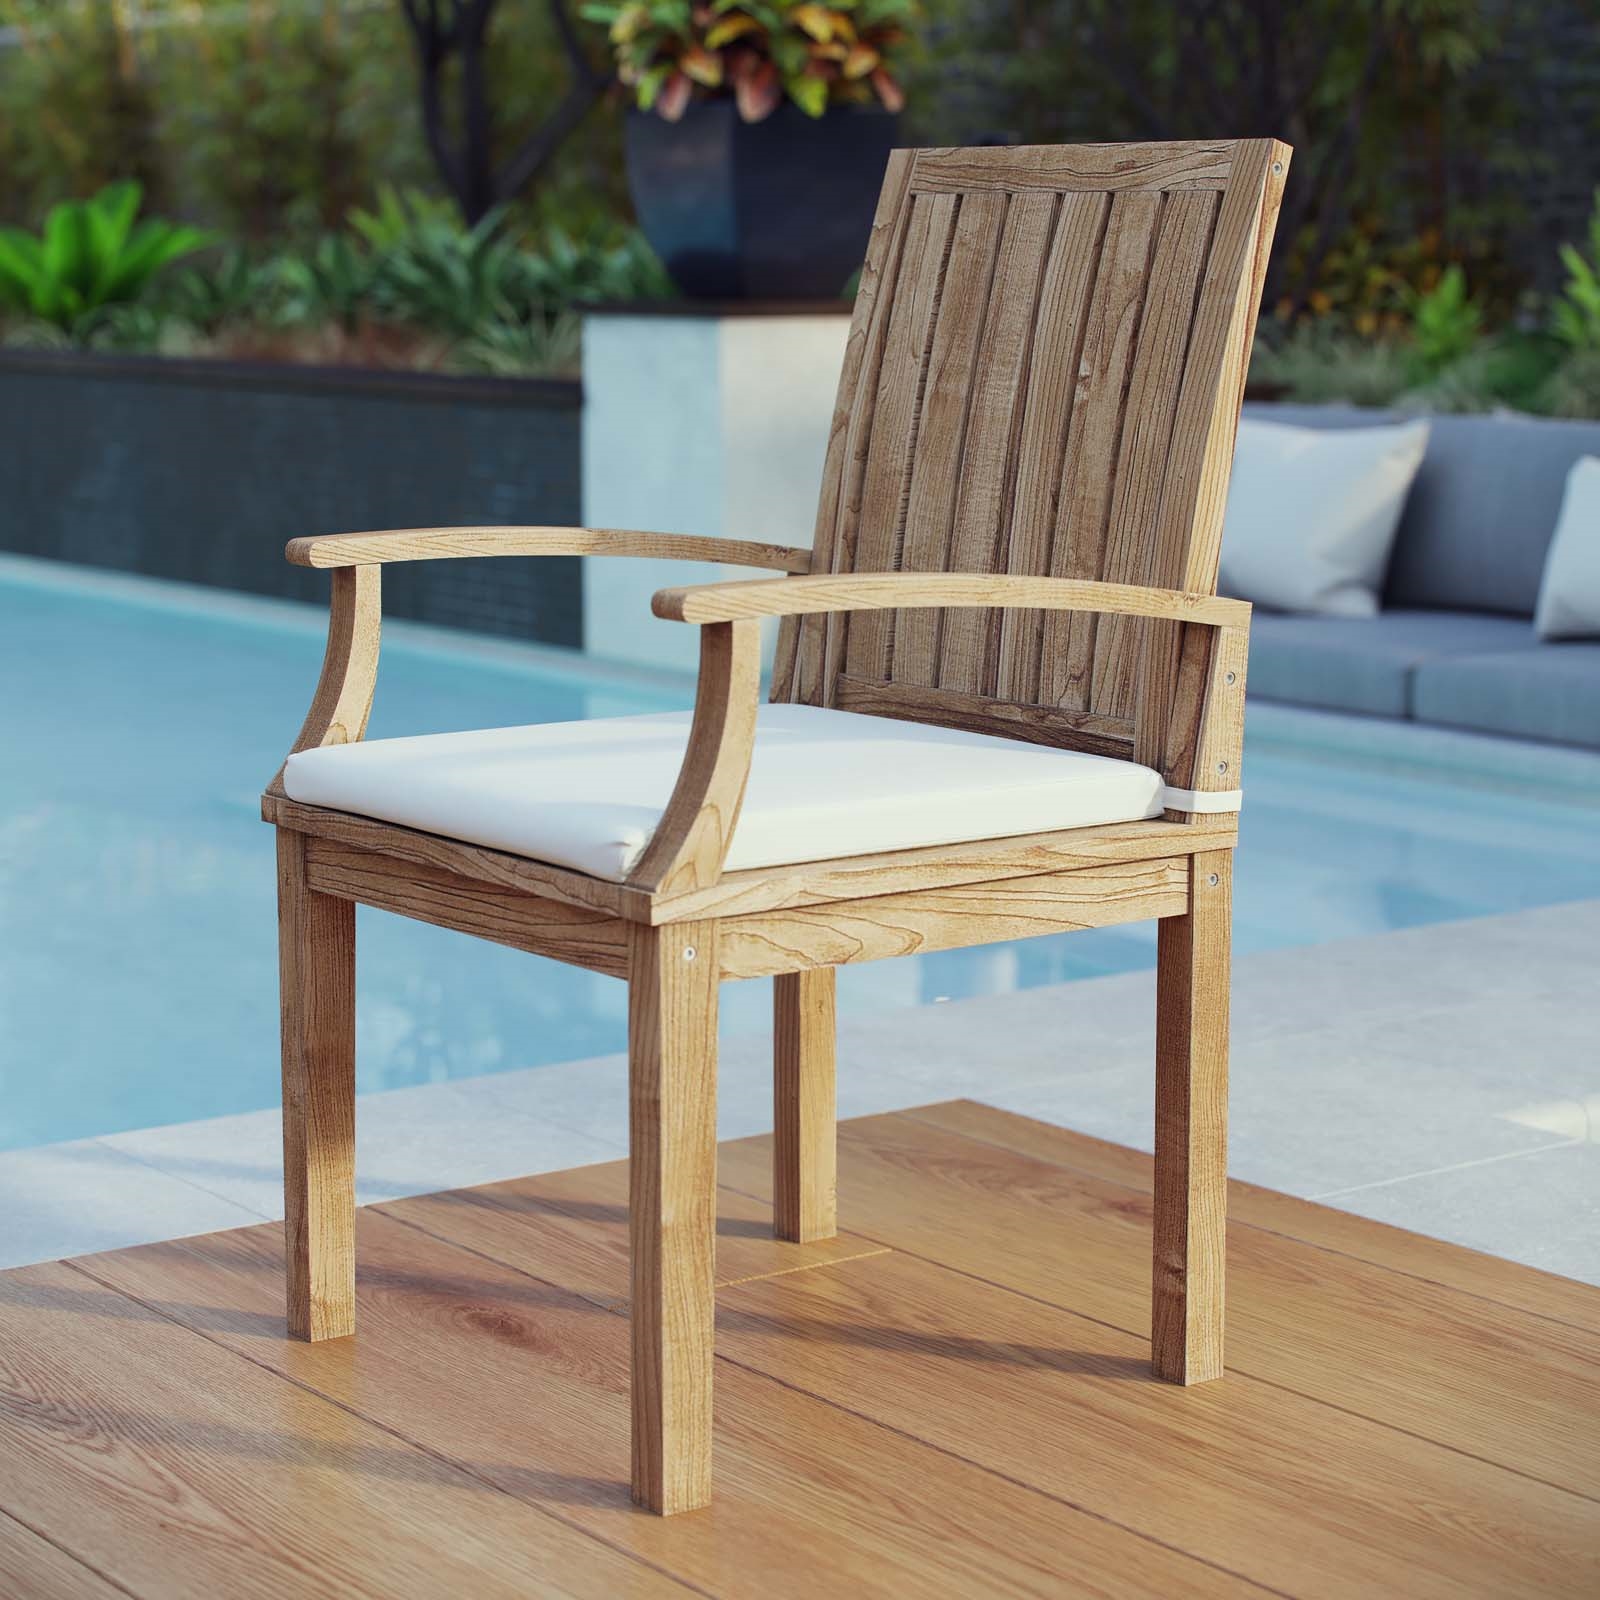 Marina Outdoor Patio Teak Dining Chair in Natural White - Hyme Furniture